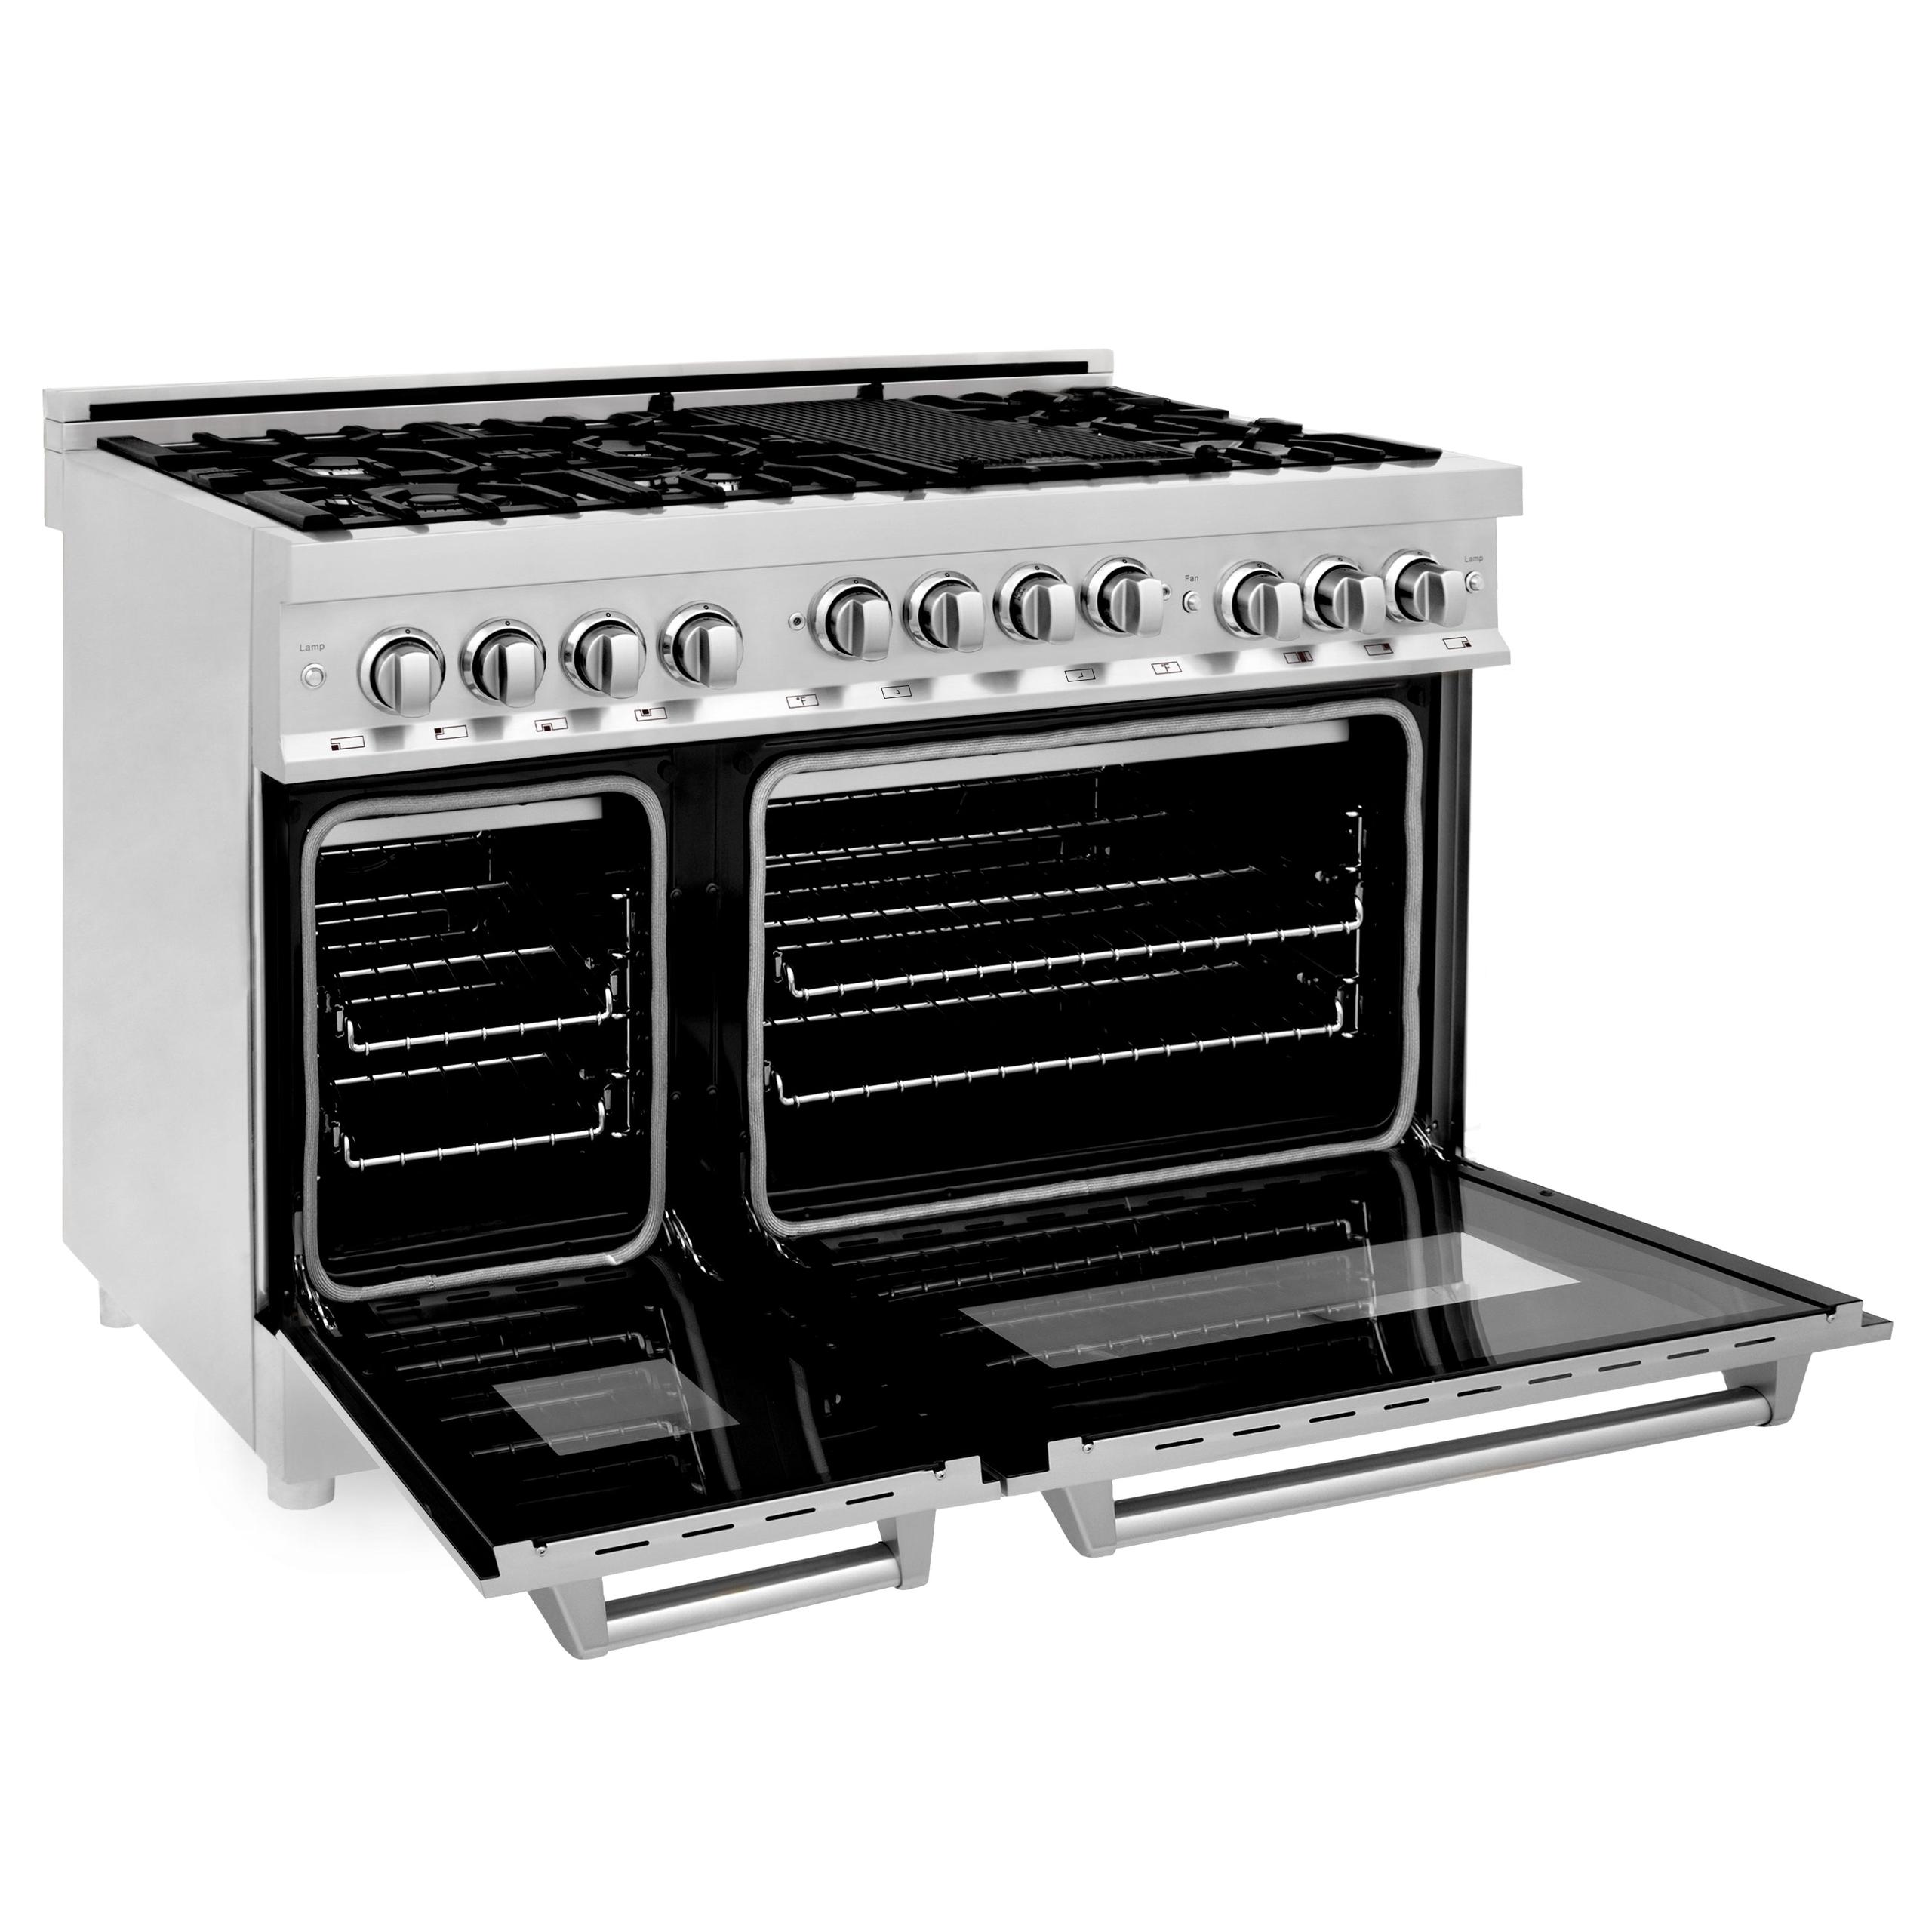 ZLINE KITCHEN AND BATH RGBM48 ZLINE 48" 6.0 cu. ft. Range with Gas Stove and Gas Oven in Stainless Steel Color: Blue Matte